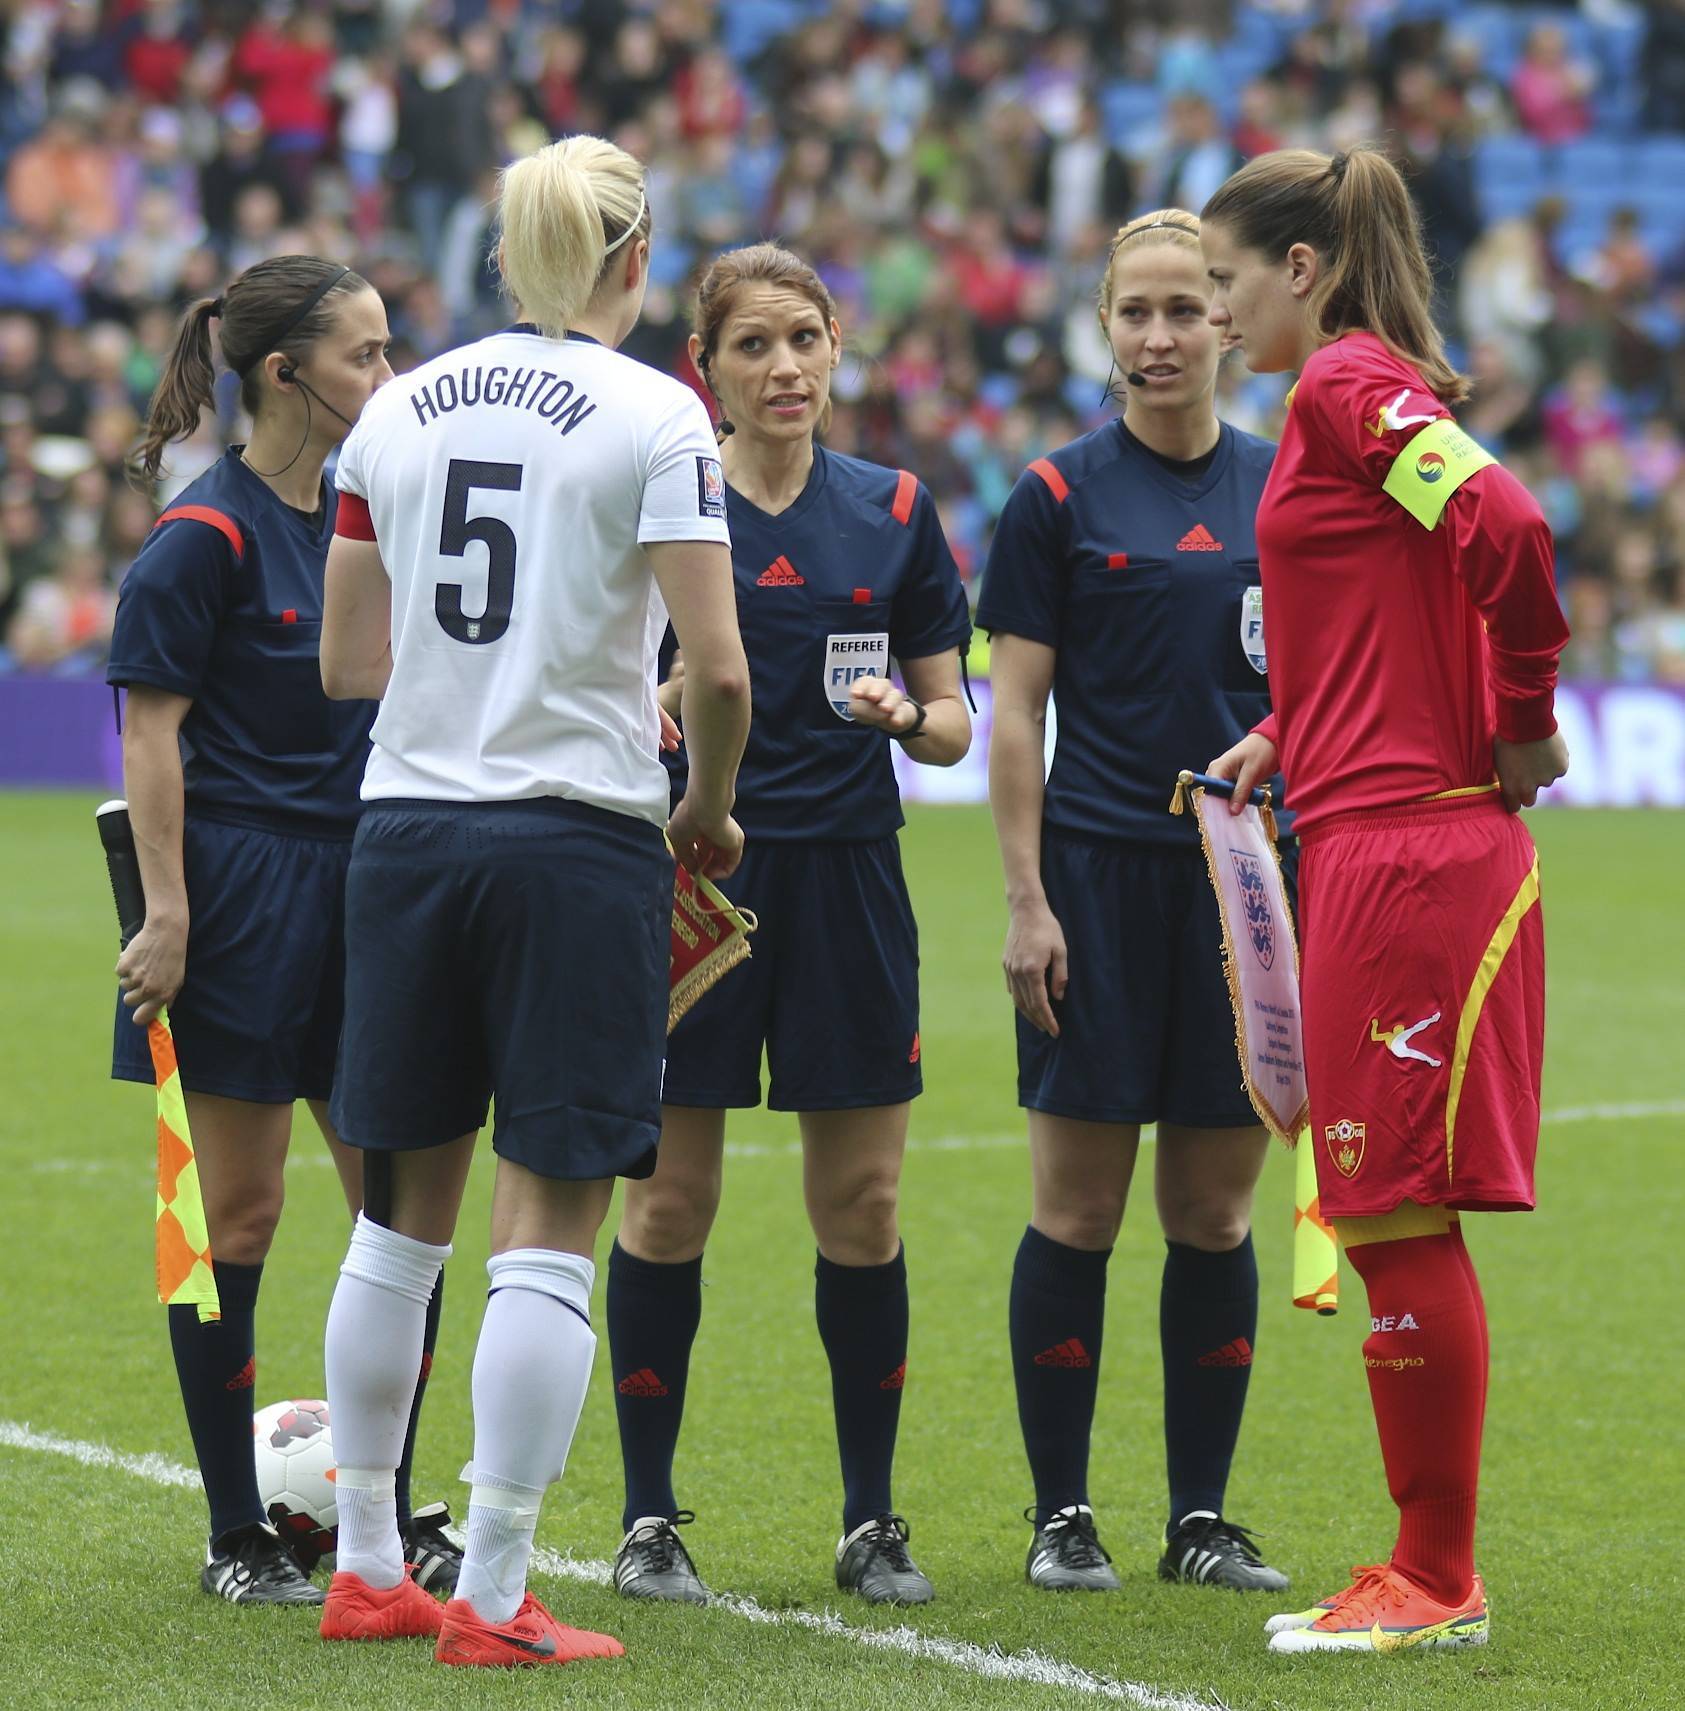 Choice_of_Ends_England_Ladies_v_Montenegro_5_4_2014_153